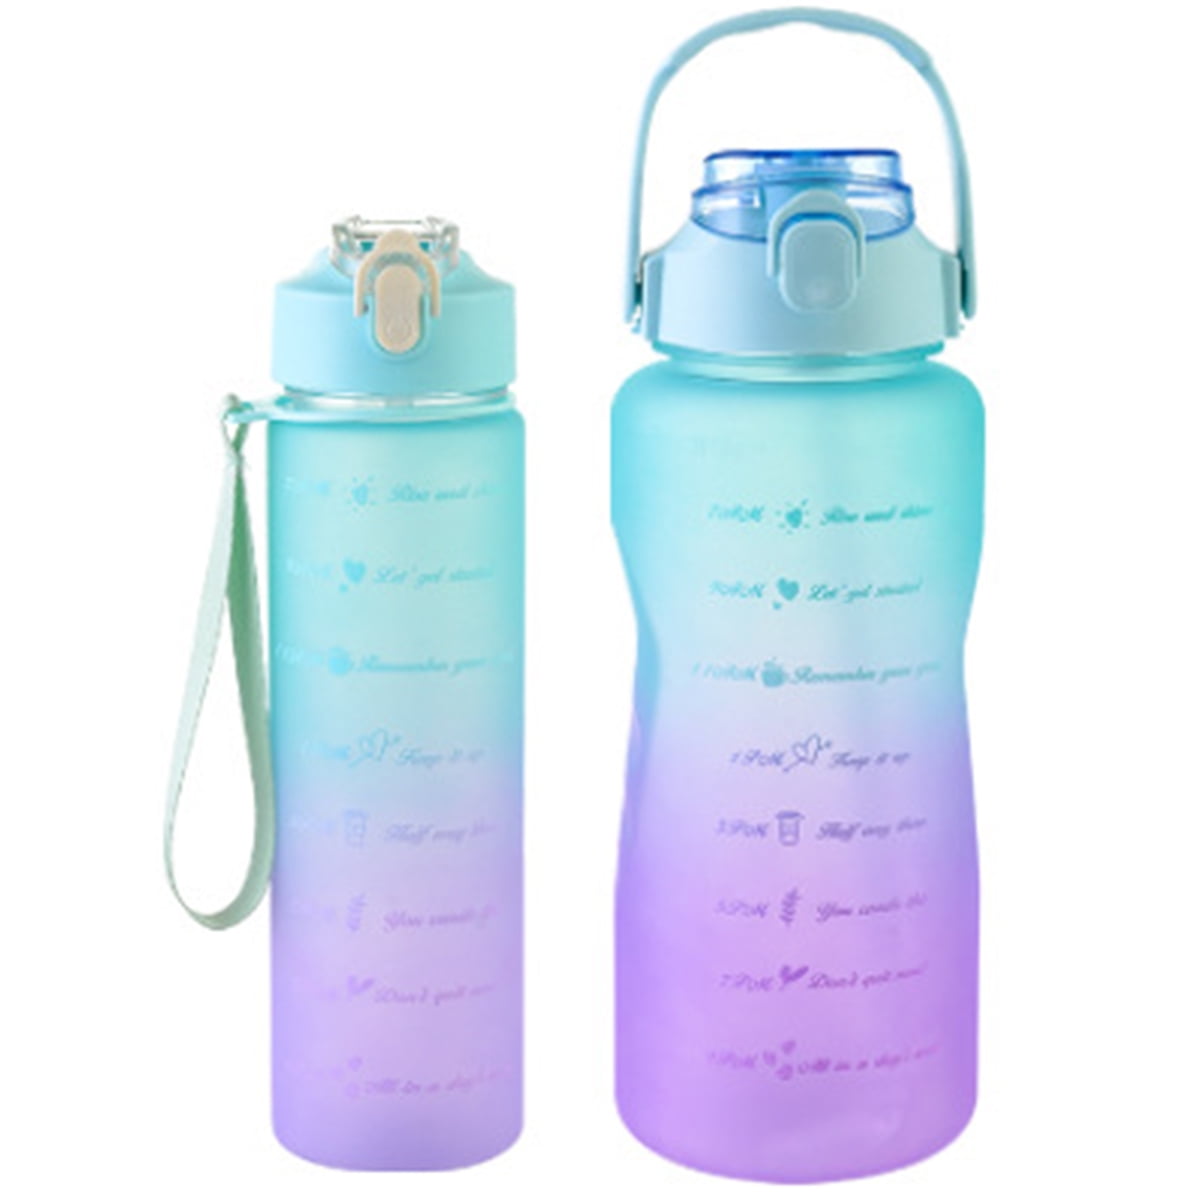 Sdjma Water Bottle Set of 2 with Times to Drink and Straw, Motivational Drinking Water Bottles with Wrist Strap, Leakproof BPA & Toxic Free, for